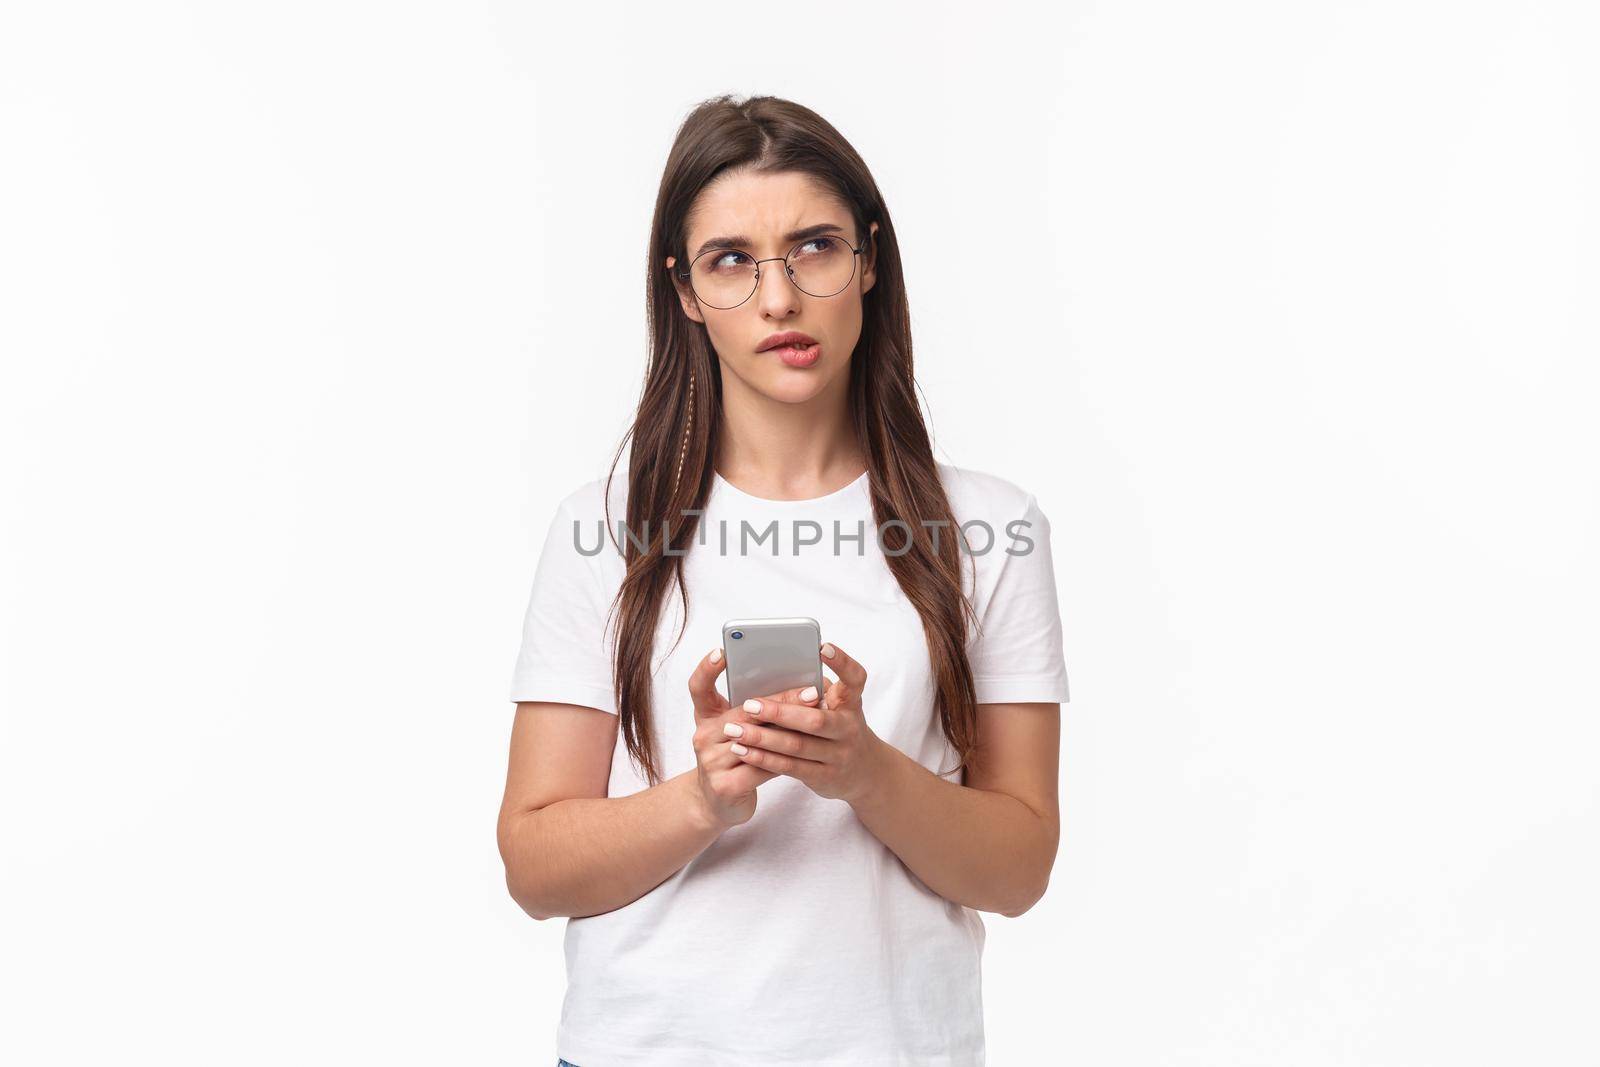 Communication, technology and lifestyle concept. Portrait of thoughtful young woman working remote, answer clients on phone, hold smartphone look up thinking what text back.